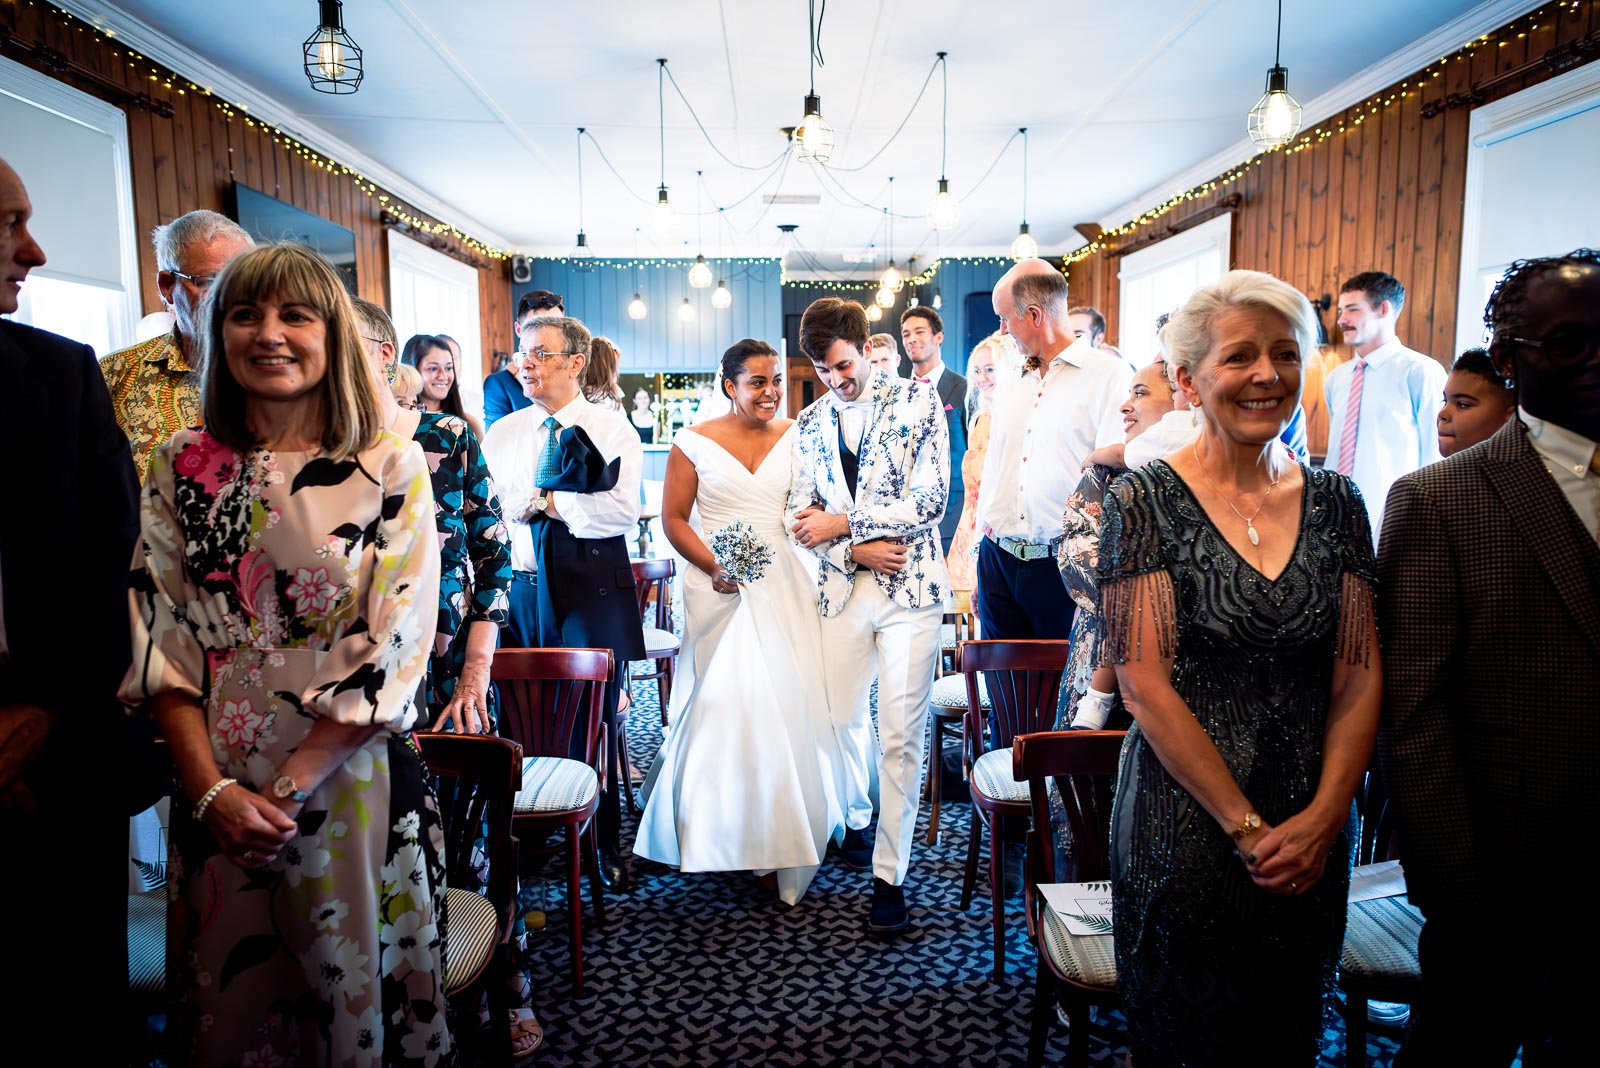 Olivia and Edward arrive on the wedding aisle of the function room at The Royal Oak in Lewes surrounded by friends and family.